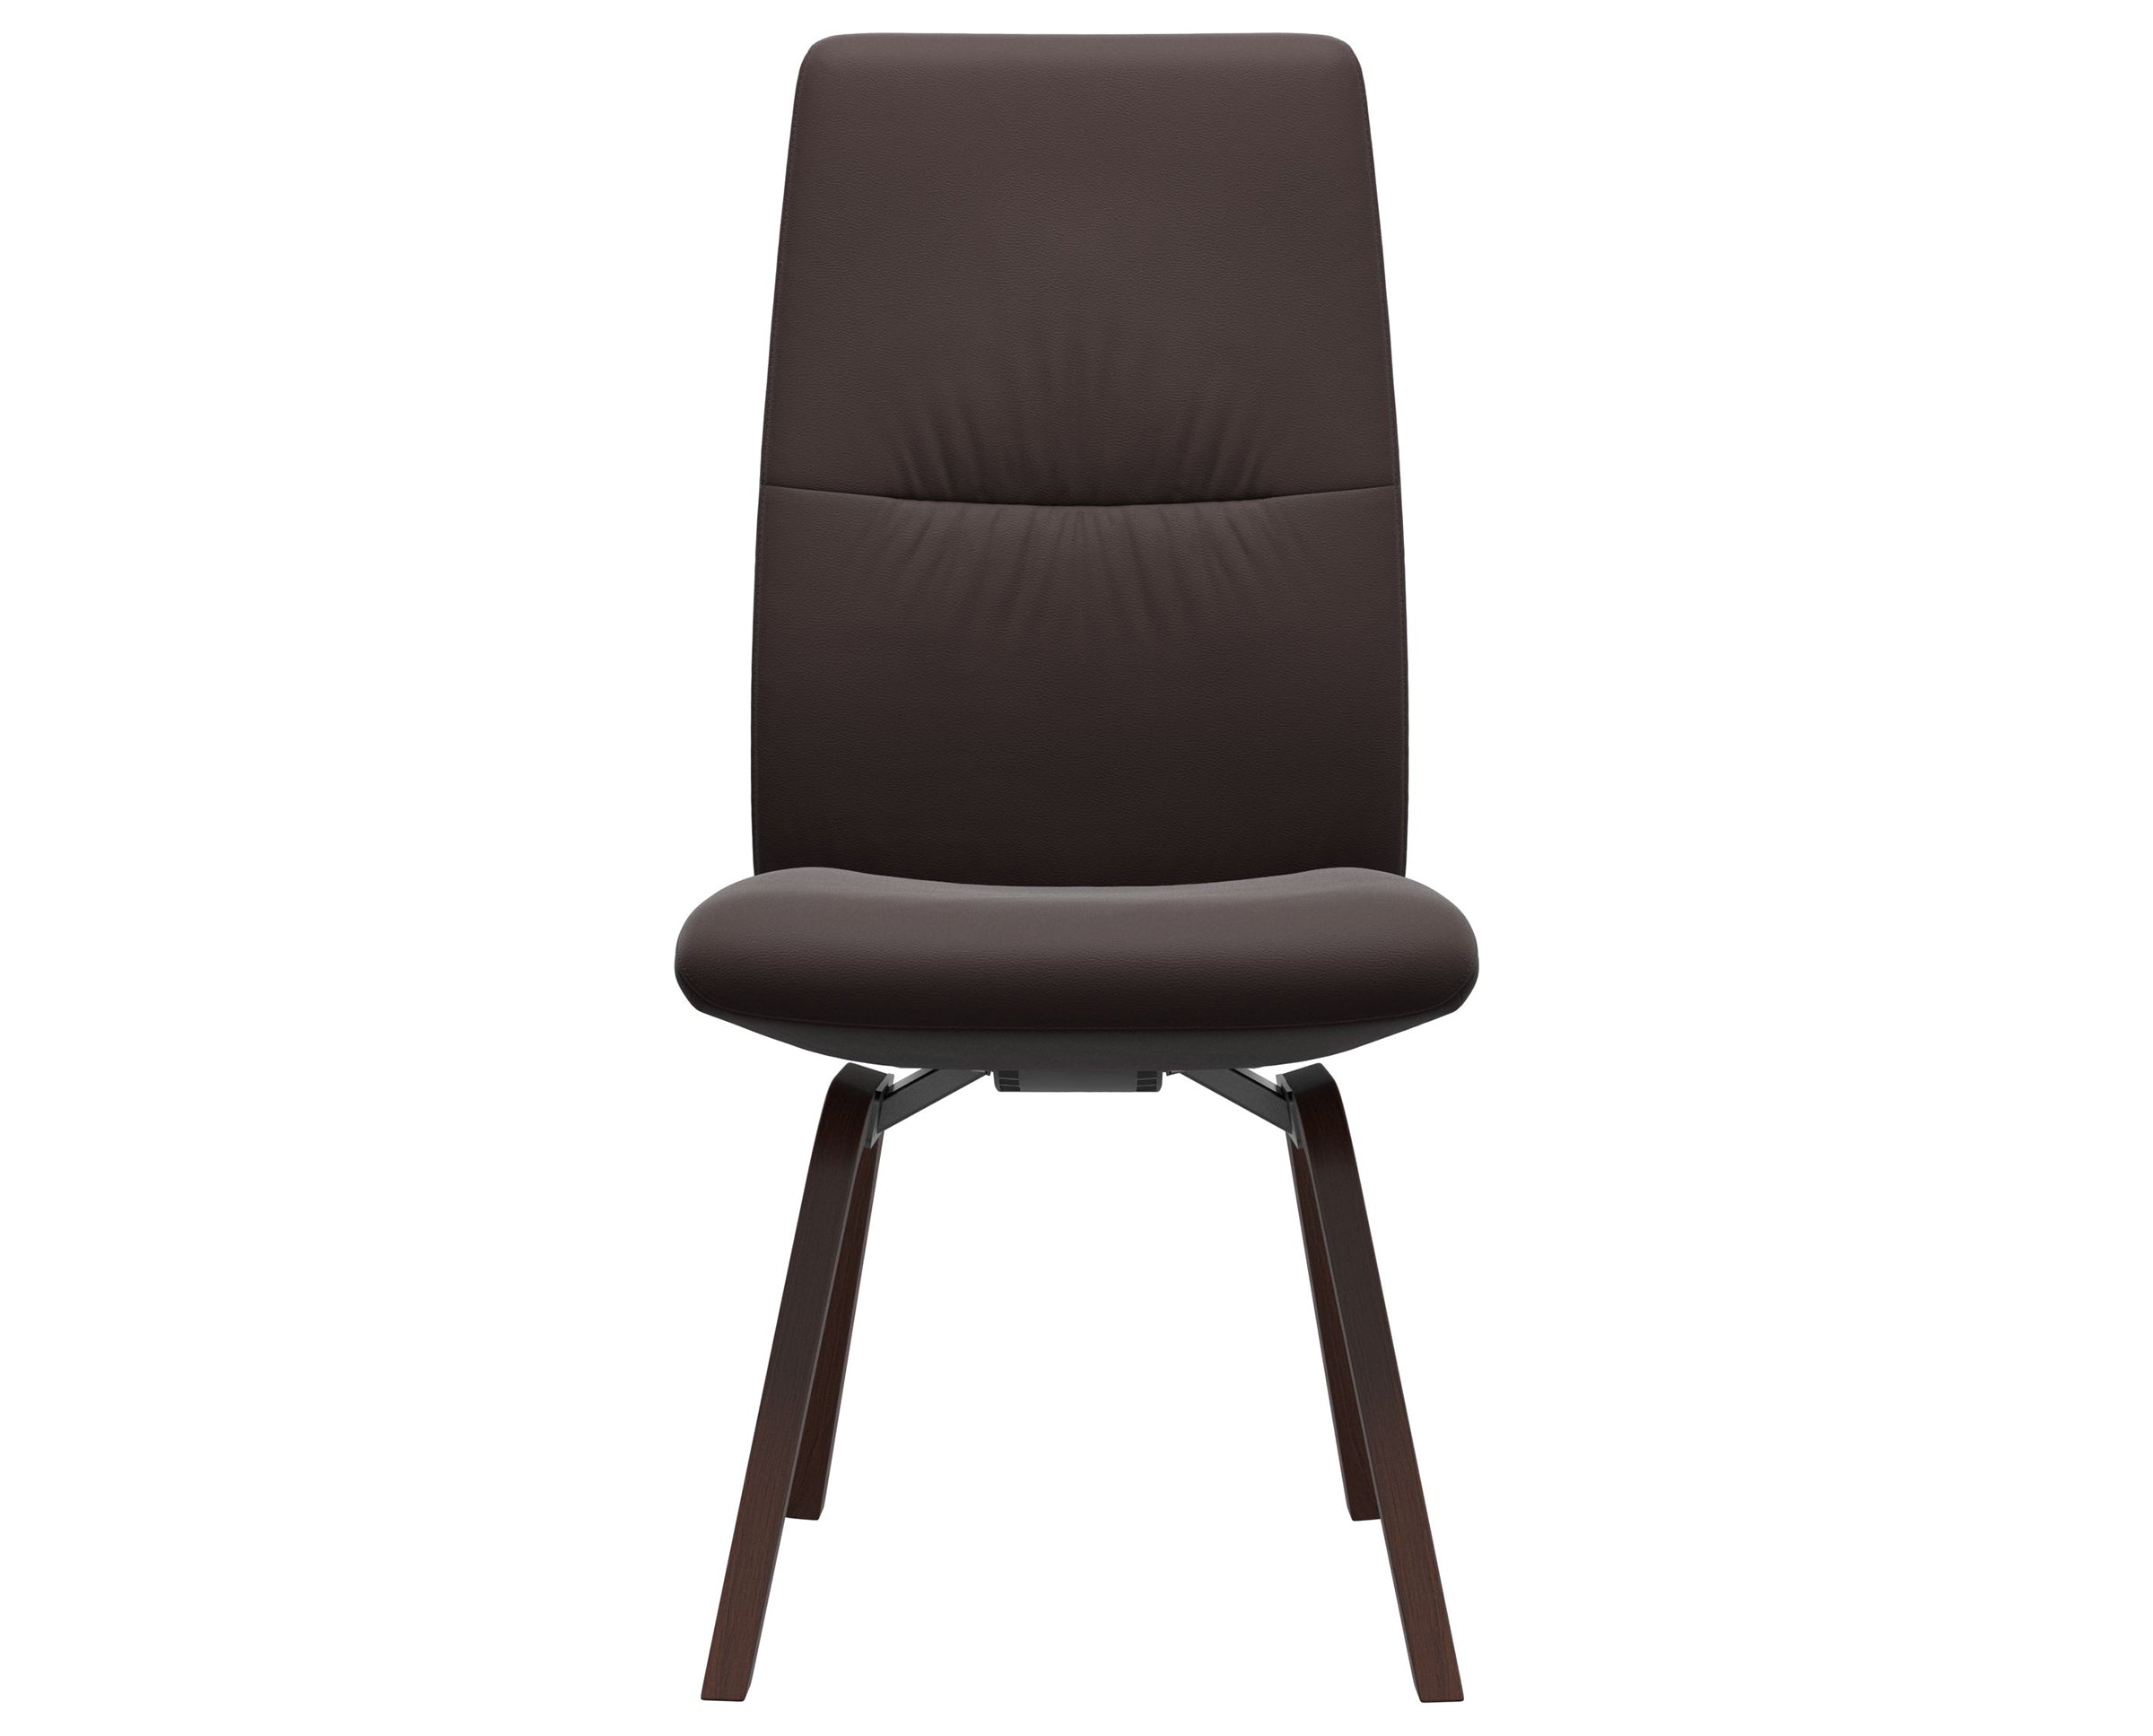 Paloma Leather Chocolate and Walnut Base | Stressless Mint High Back D200 Dining Chair | Valley Ridge Furniture